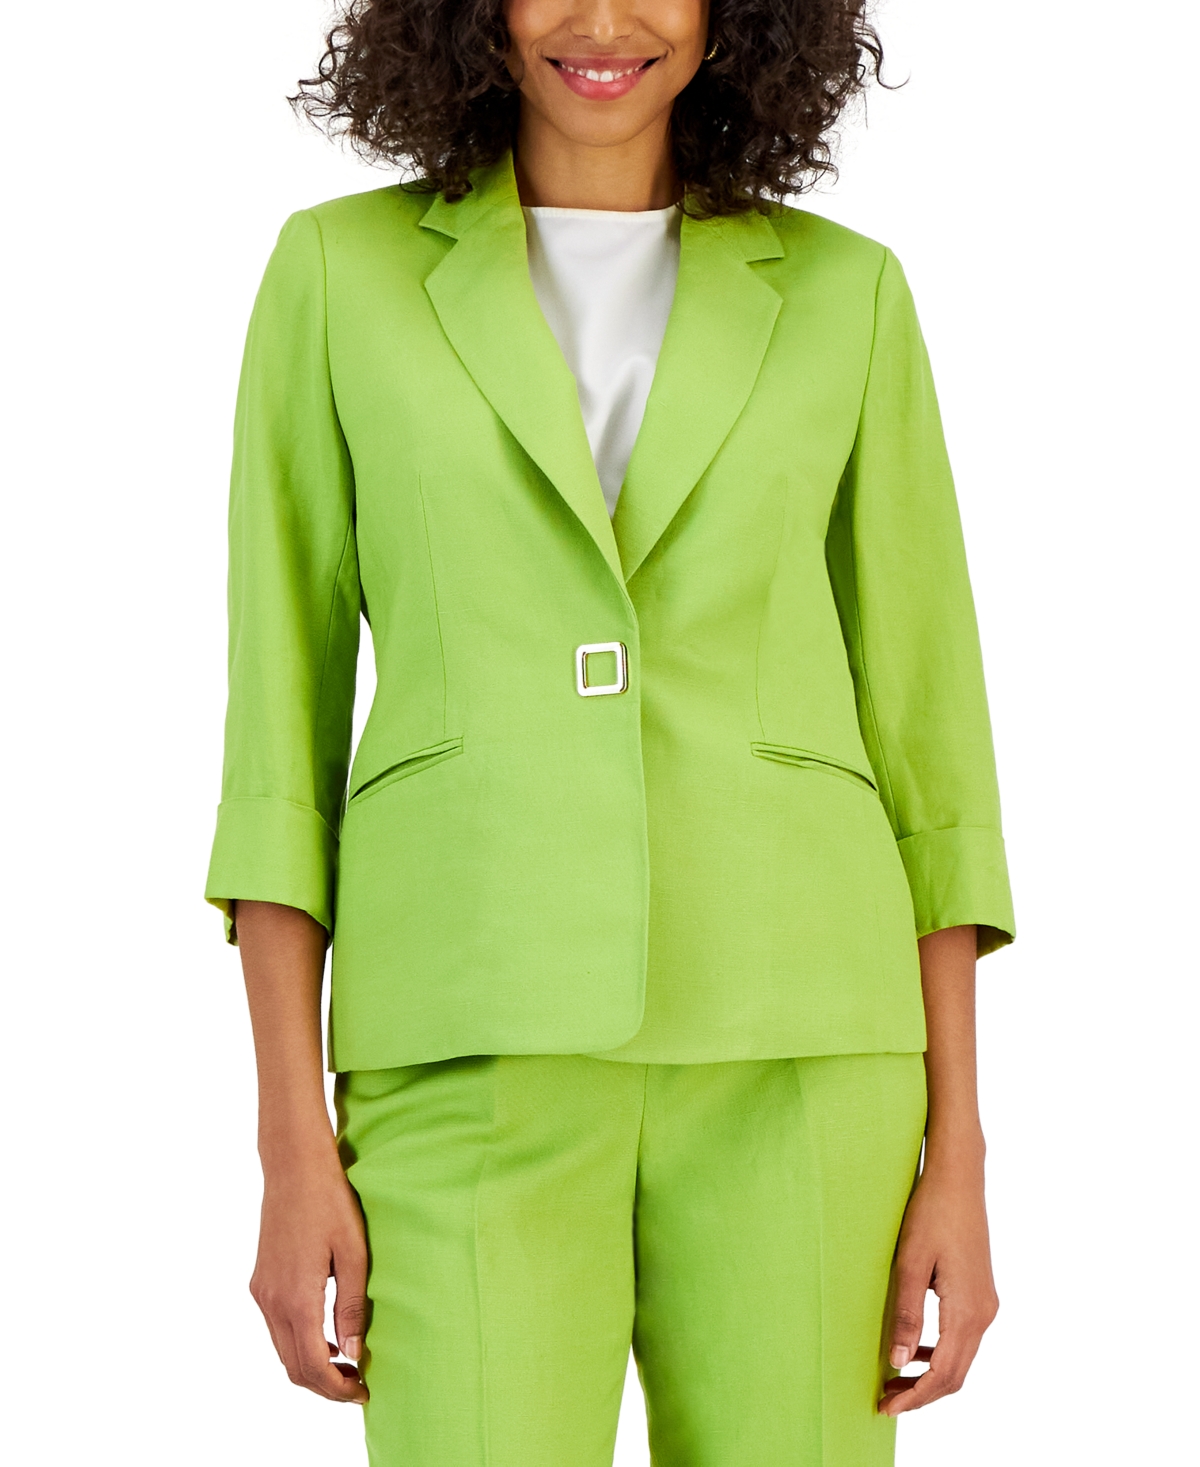 Buy Textured Formal Blazer with Notch Lapel and Long Sleeves